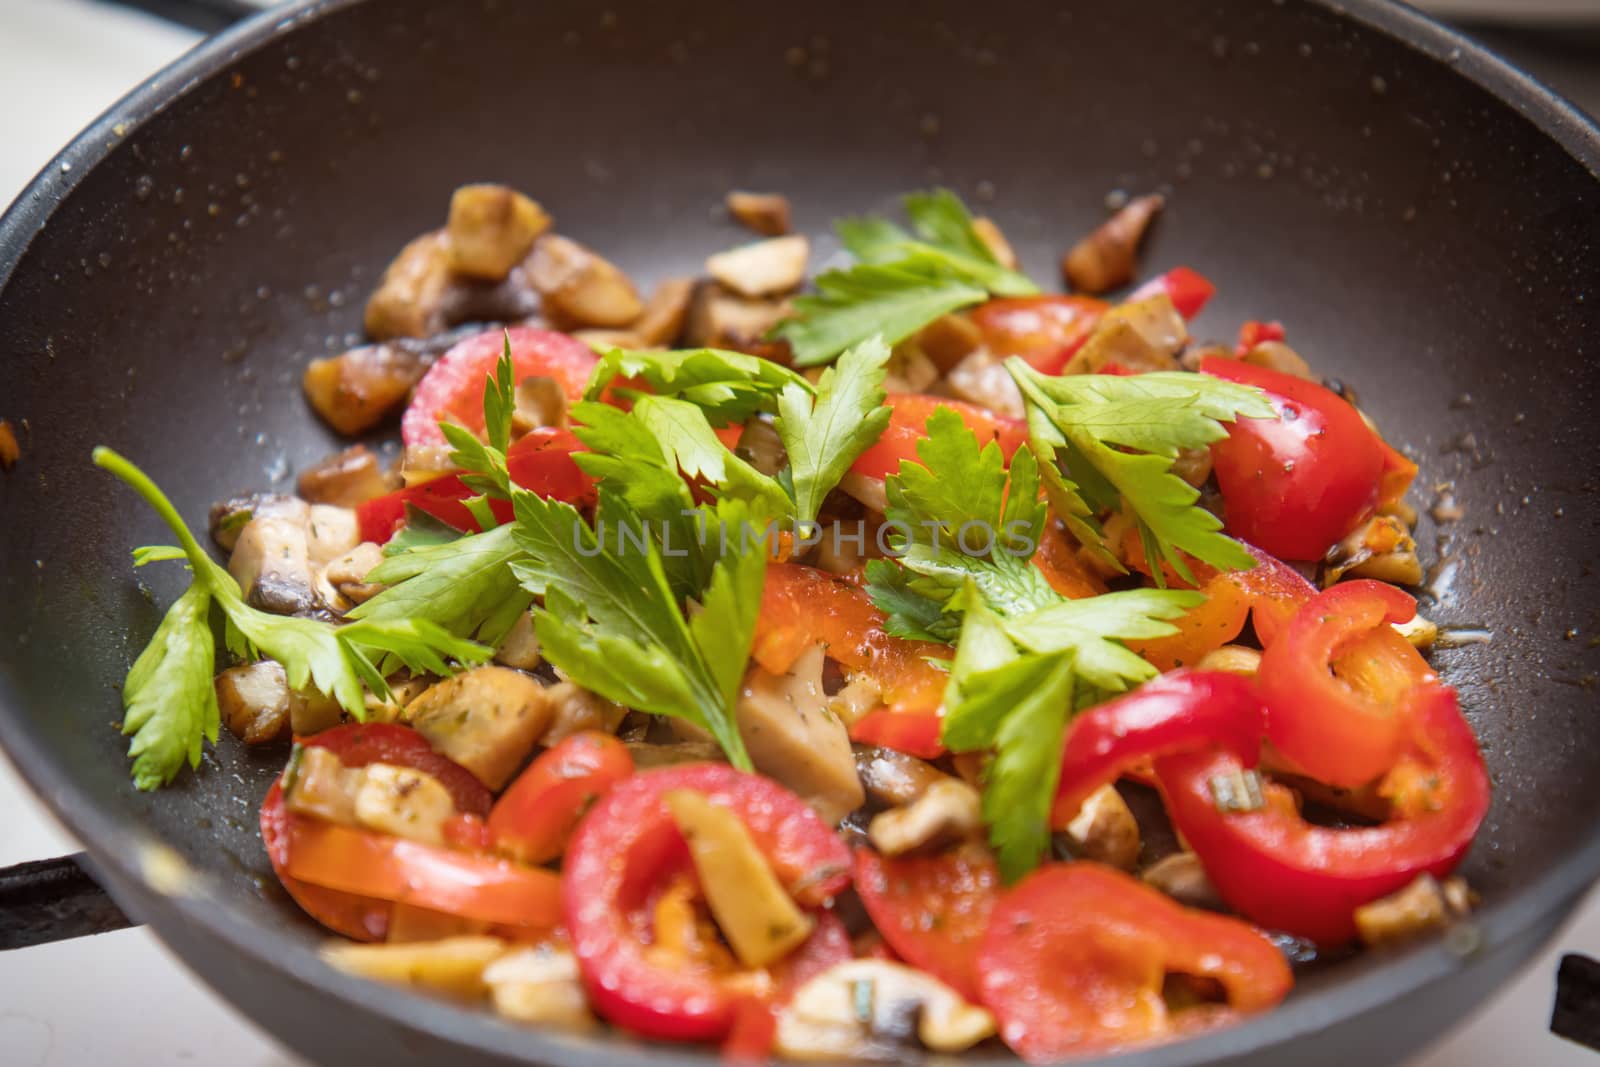 Mushrooms and fresh sweet red pepper in the pan for cooking. Spices and fresh parsley. Shallow depth of field. Toned